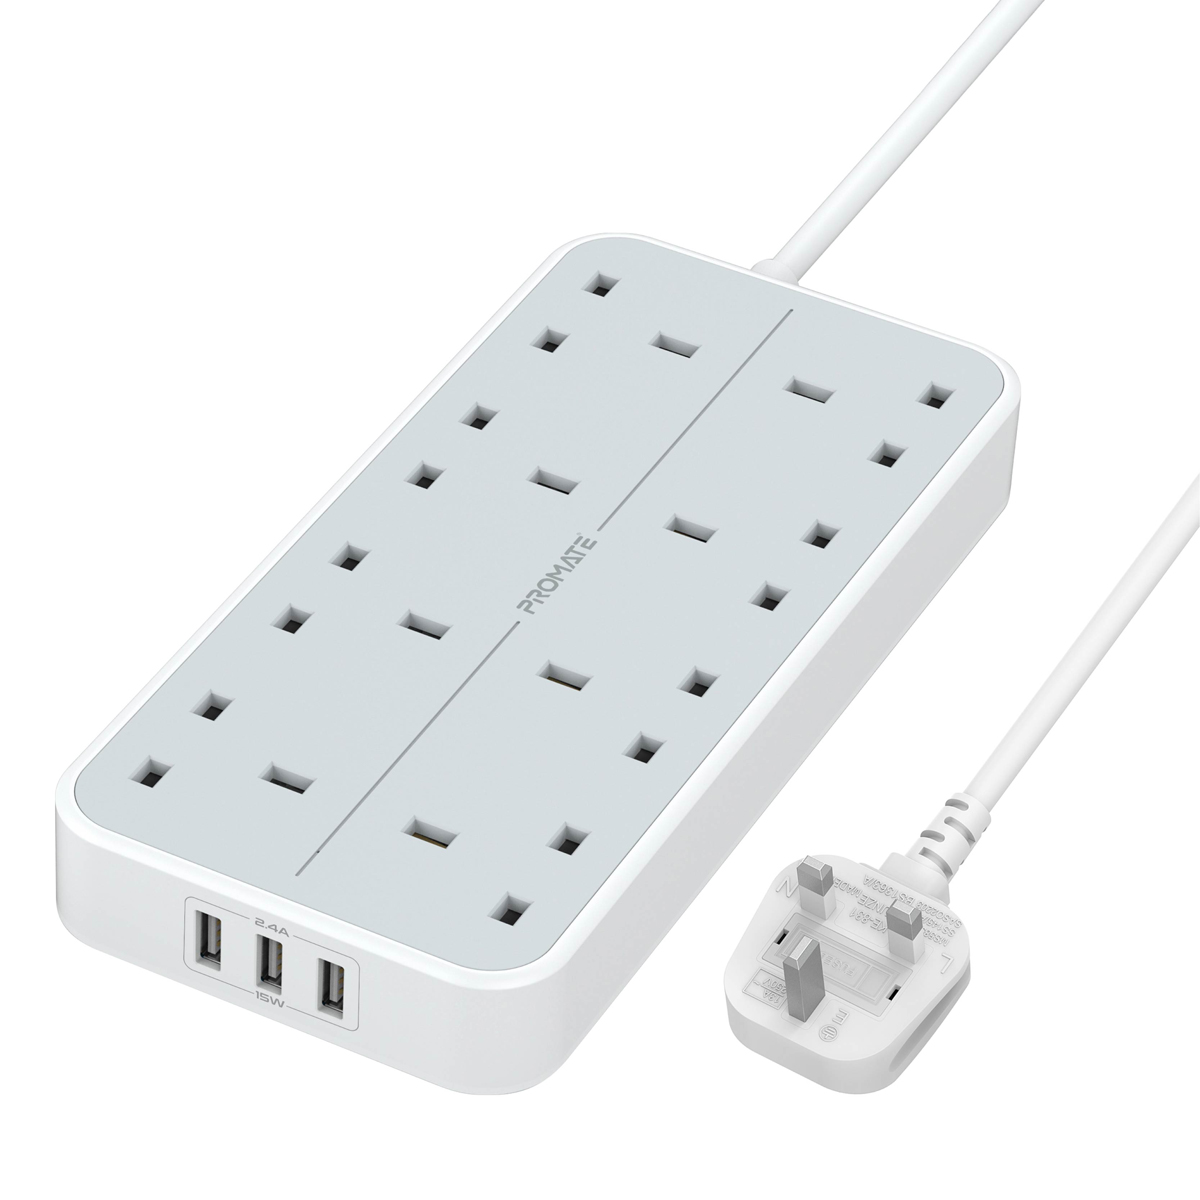 Promate Power Strip, Heavy-Duty 11-in-1 Surge Protector Power Extension with Massive 3250W 8 AC Outlets, 3 USB Intellicharge Ports and 2M Cord Length for iPhone12/TV/Fridge/Office, PowerCord8UK-2M